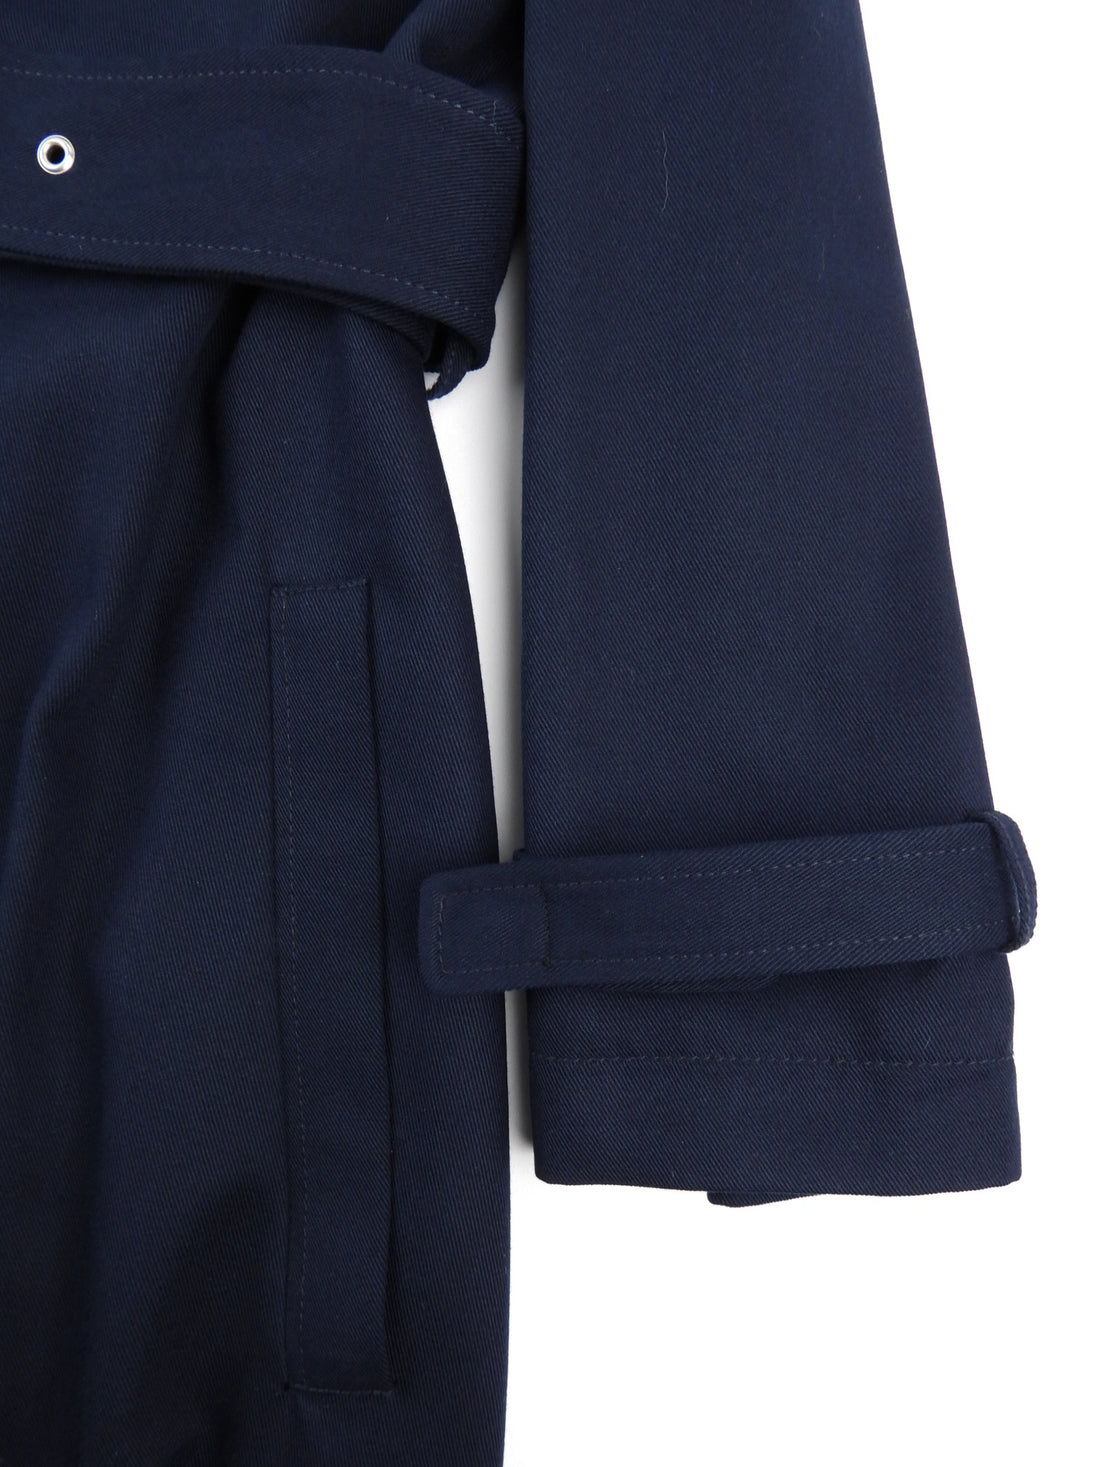 ACNE Studios Navy Blue Press Stud Belted Long Trench Coat - 36